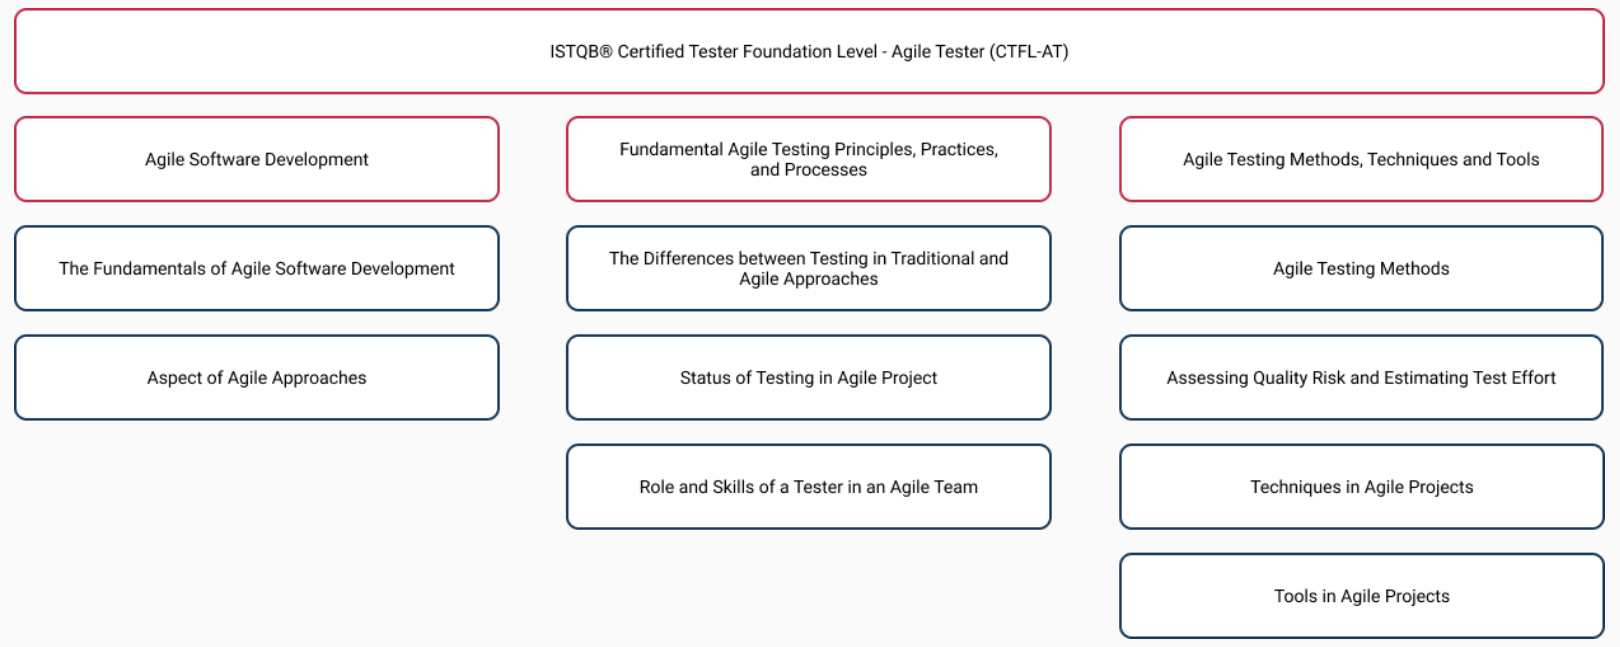 Contents of CTFL-AT certification